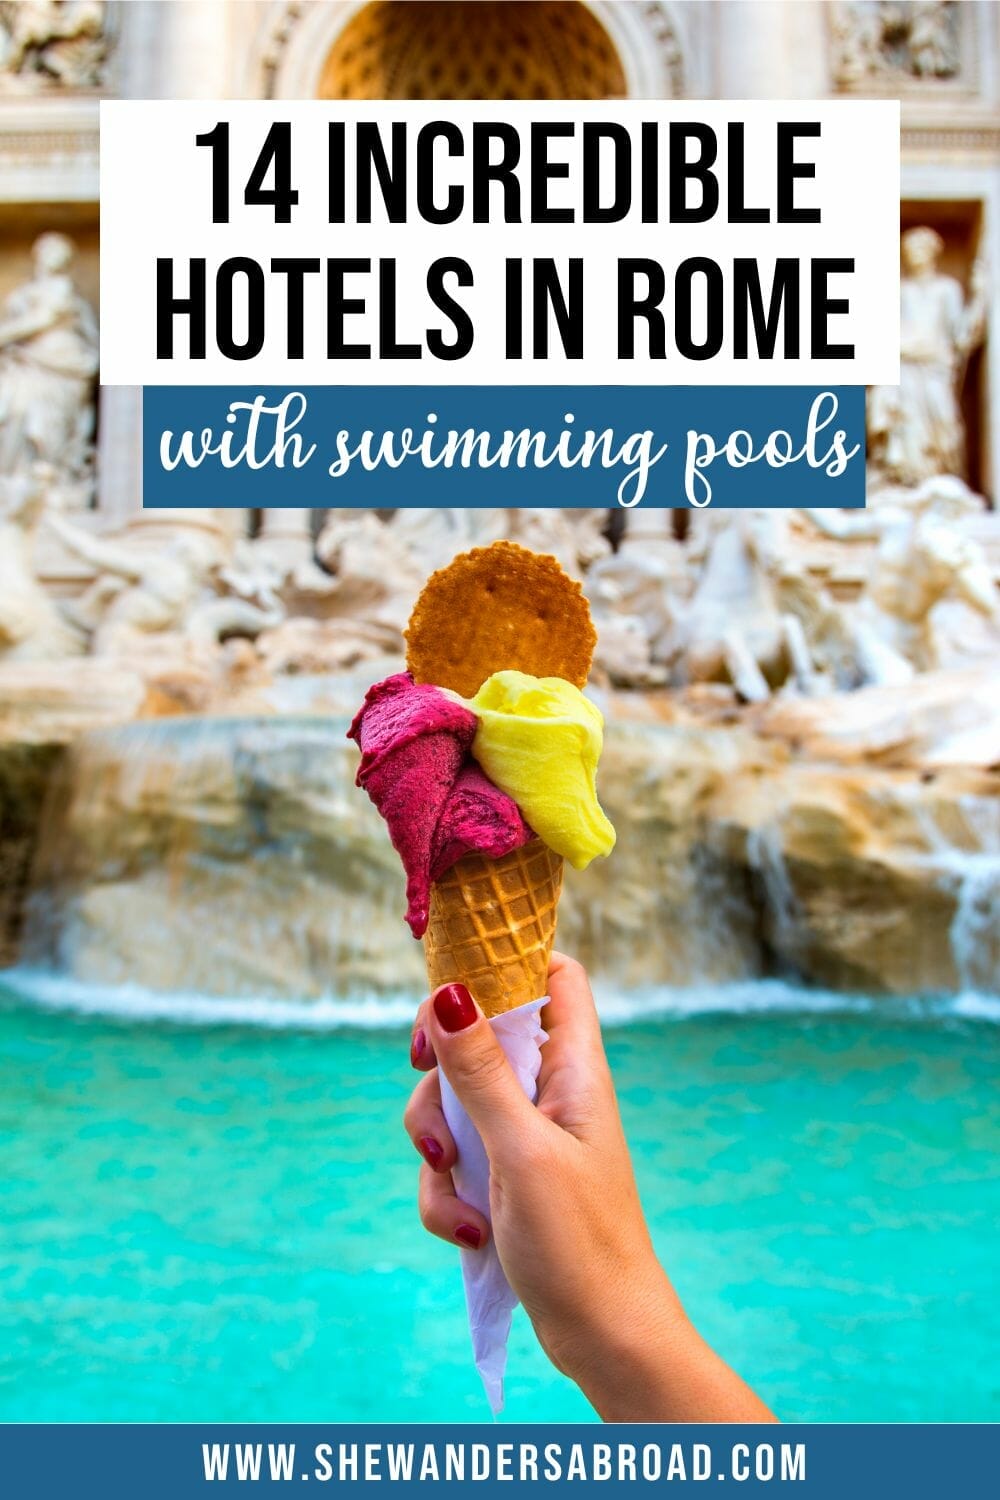 14 Stunning Rome Hotels with Pools (Rooftop Pools, Private Hot Tubs & More)